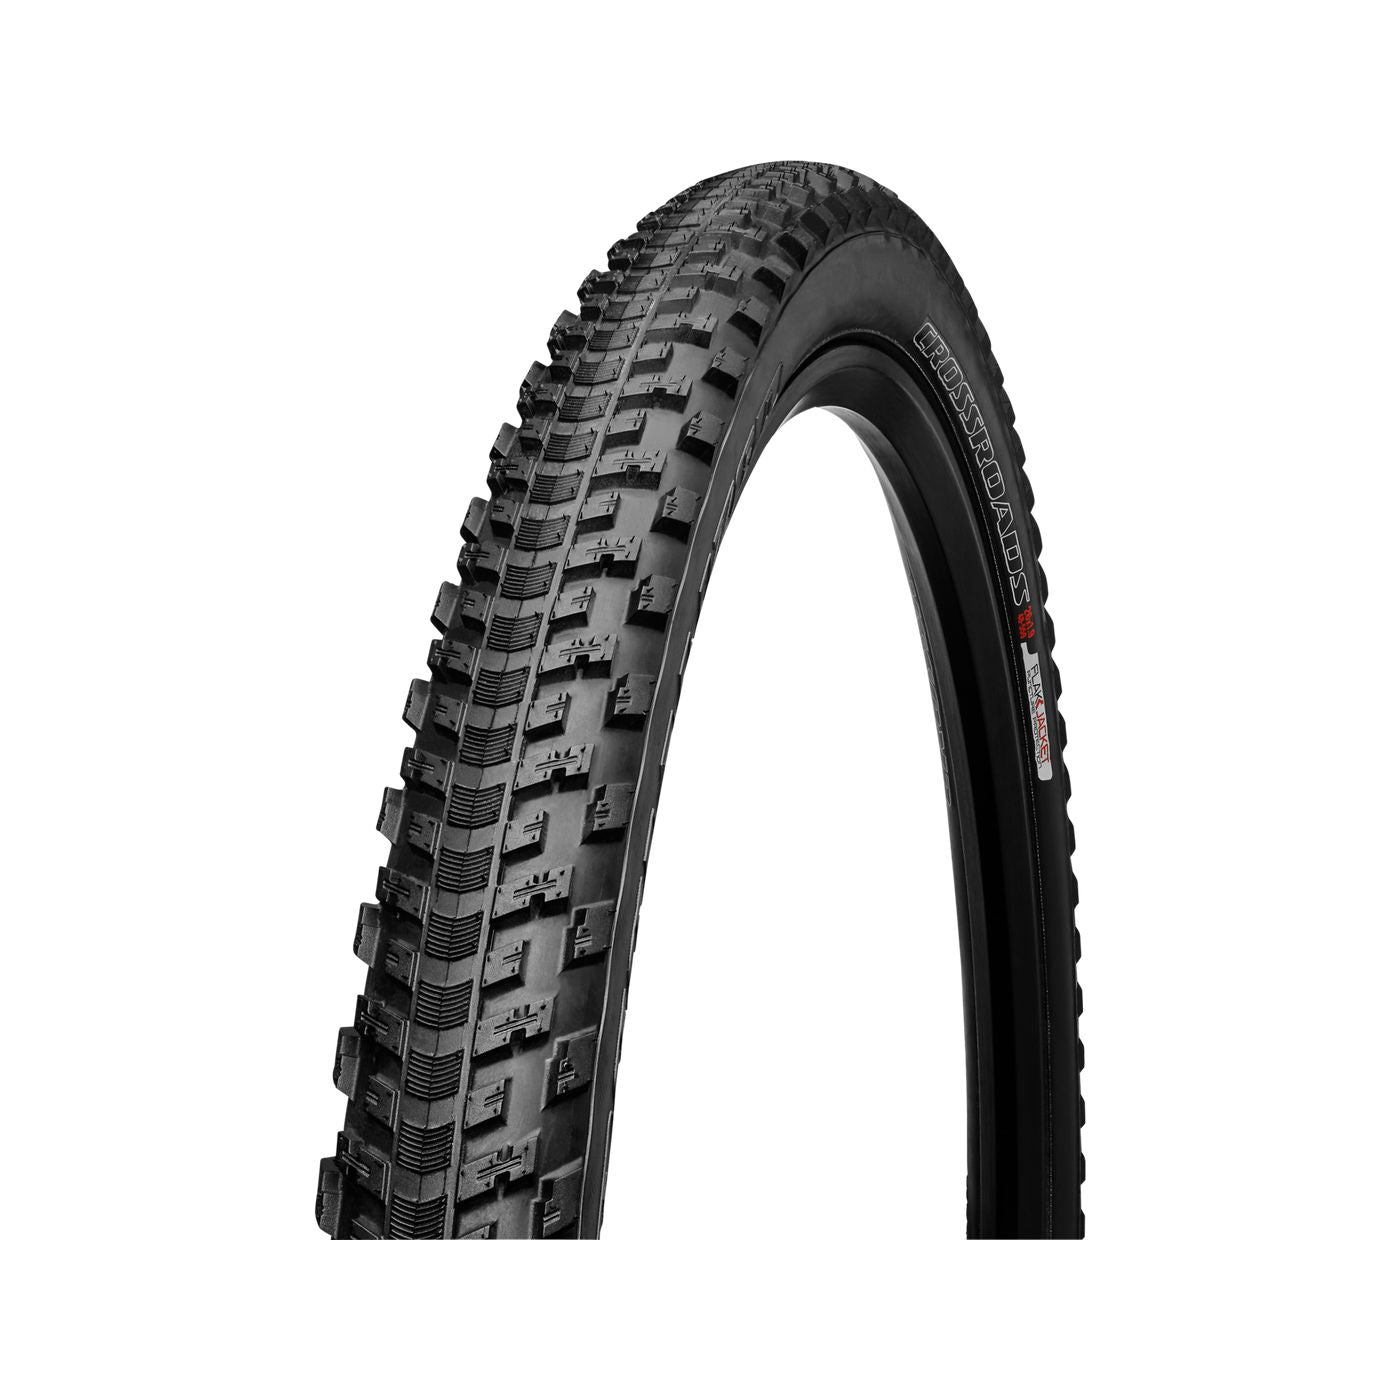 Specialized Crossroads 700c Bike Tire - Tires - Bicycle Warehouse